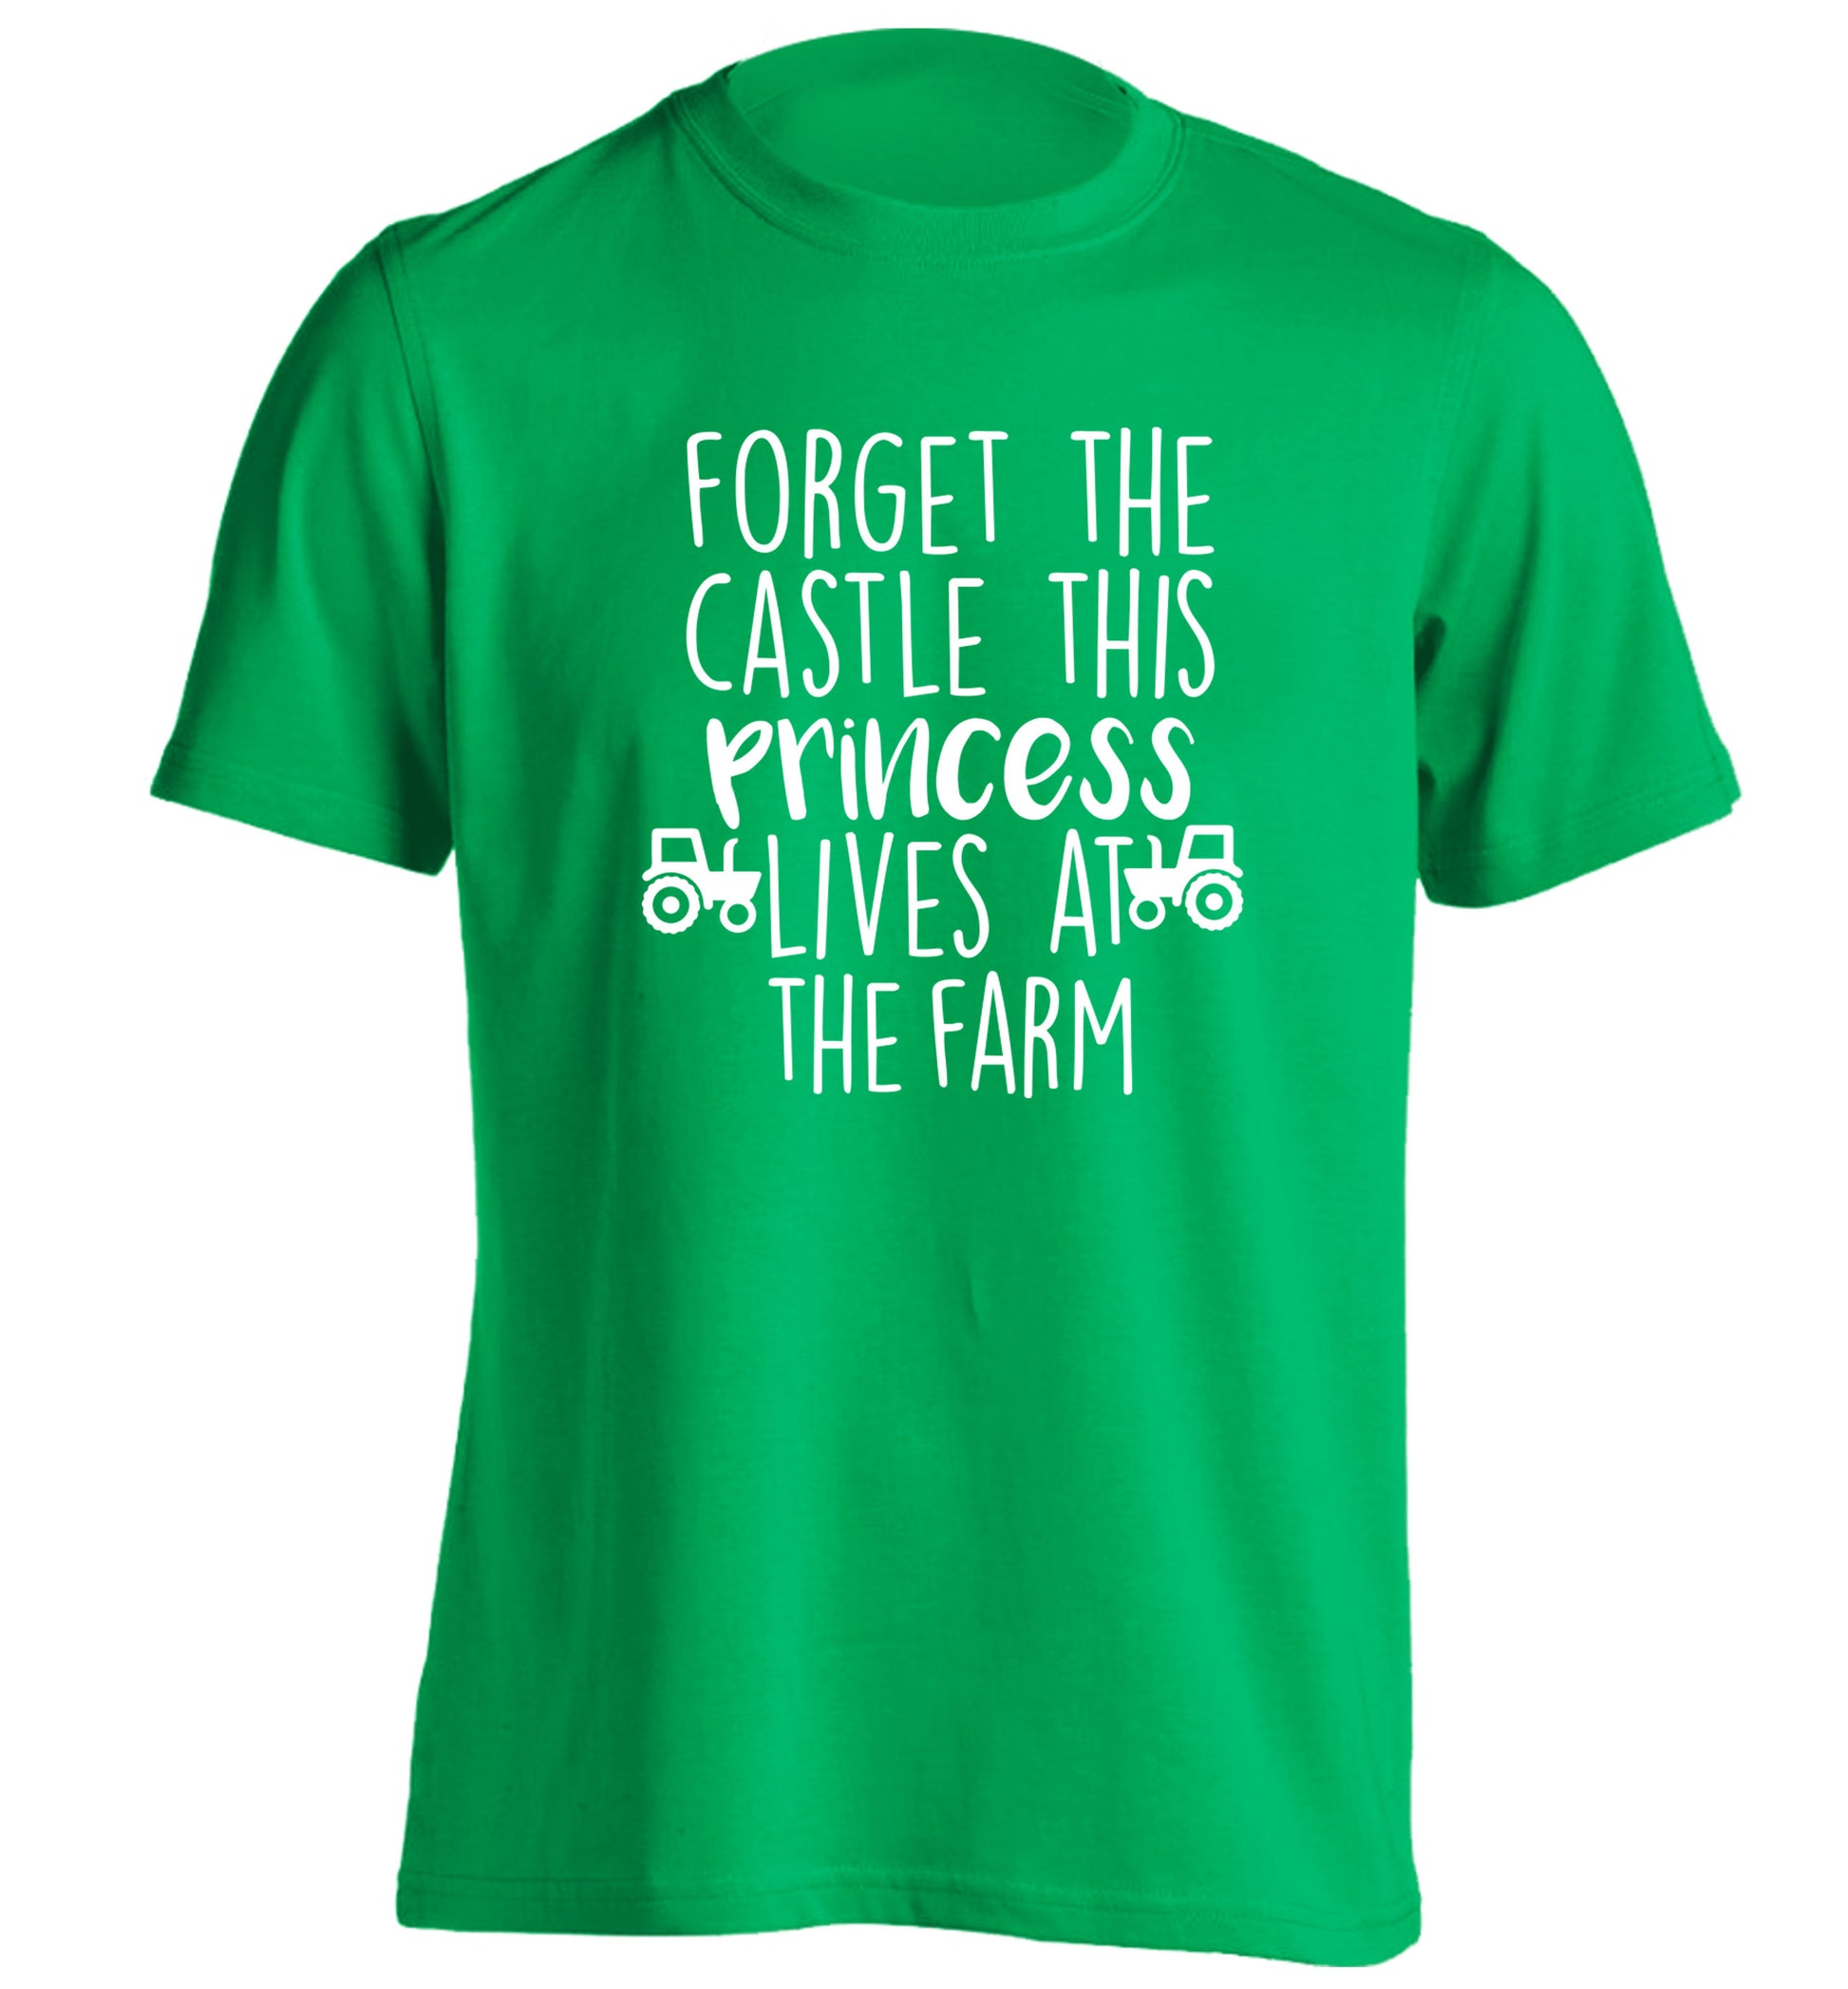 Forget the castle this princess lives at the farm adults unisex green Tshirt 2XL